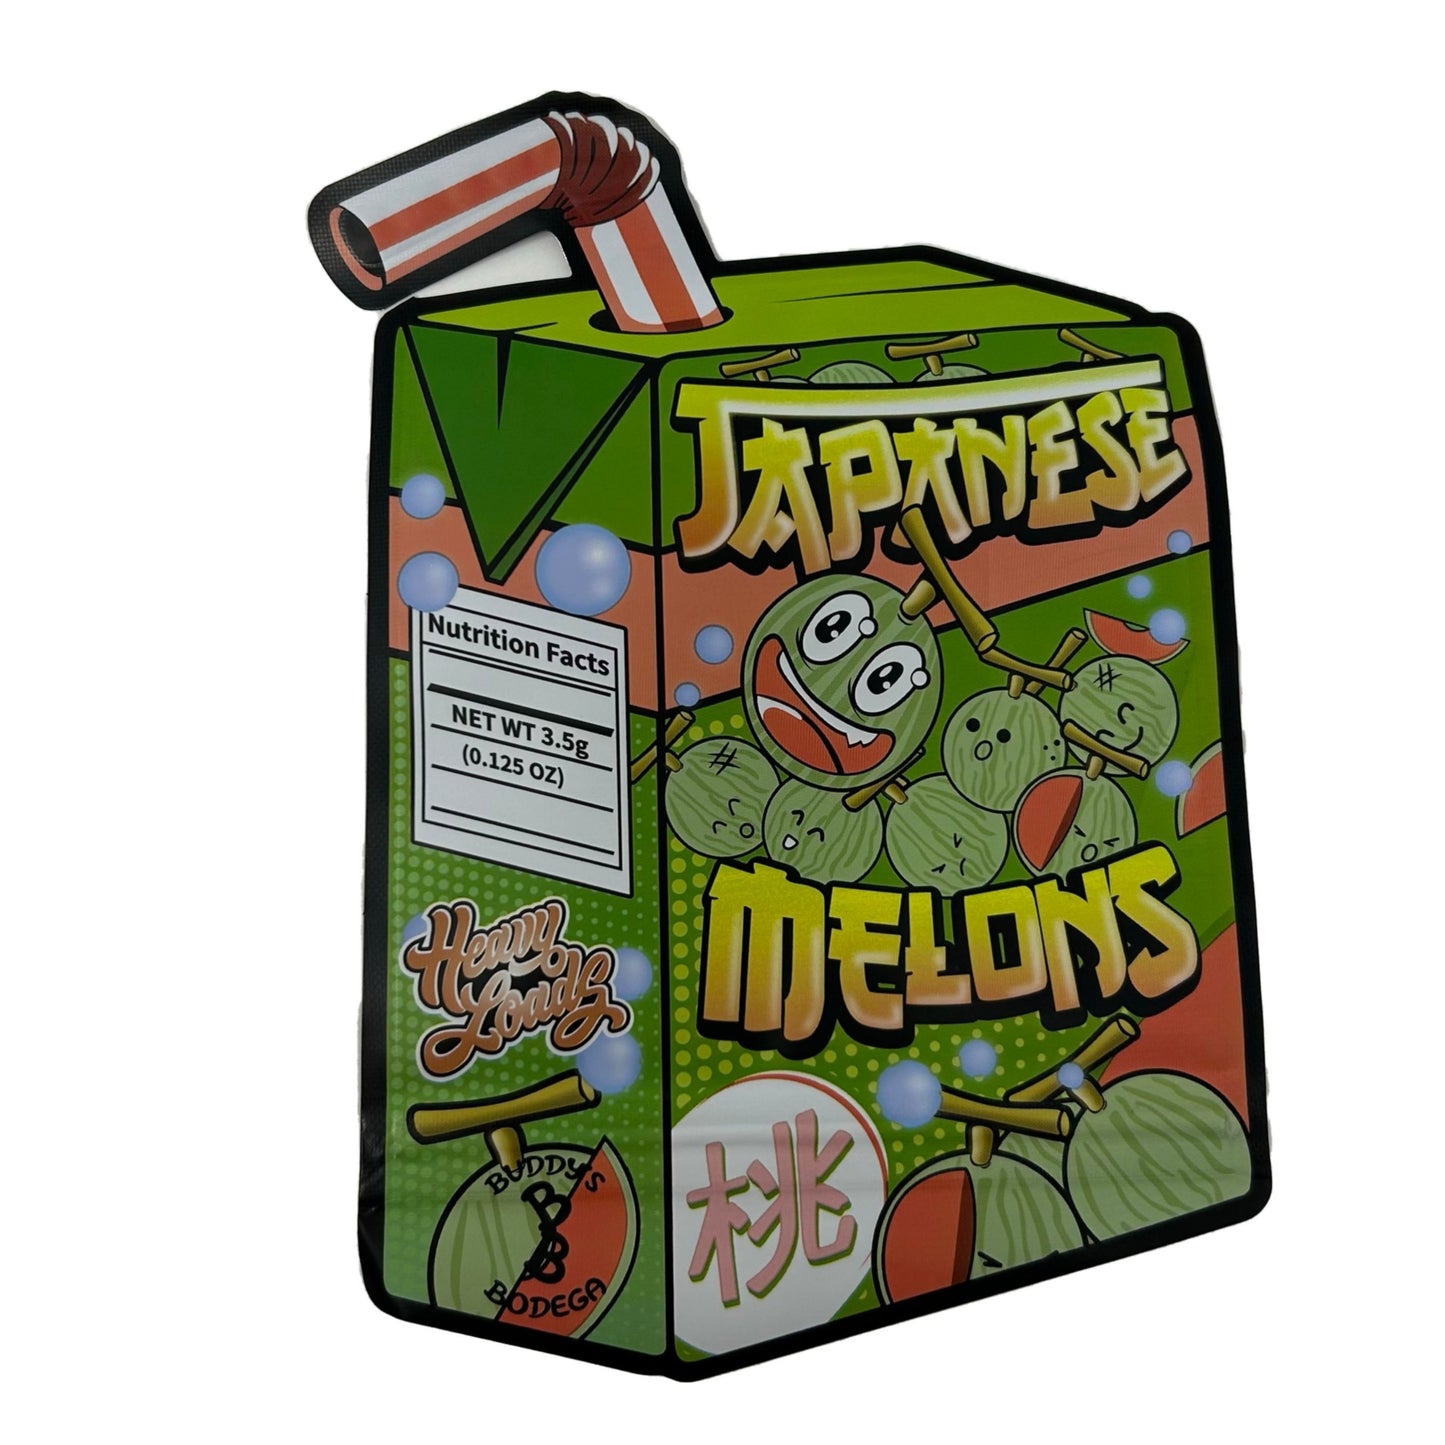 Japanese Melons 3.5G Mylar Bags